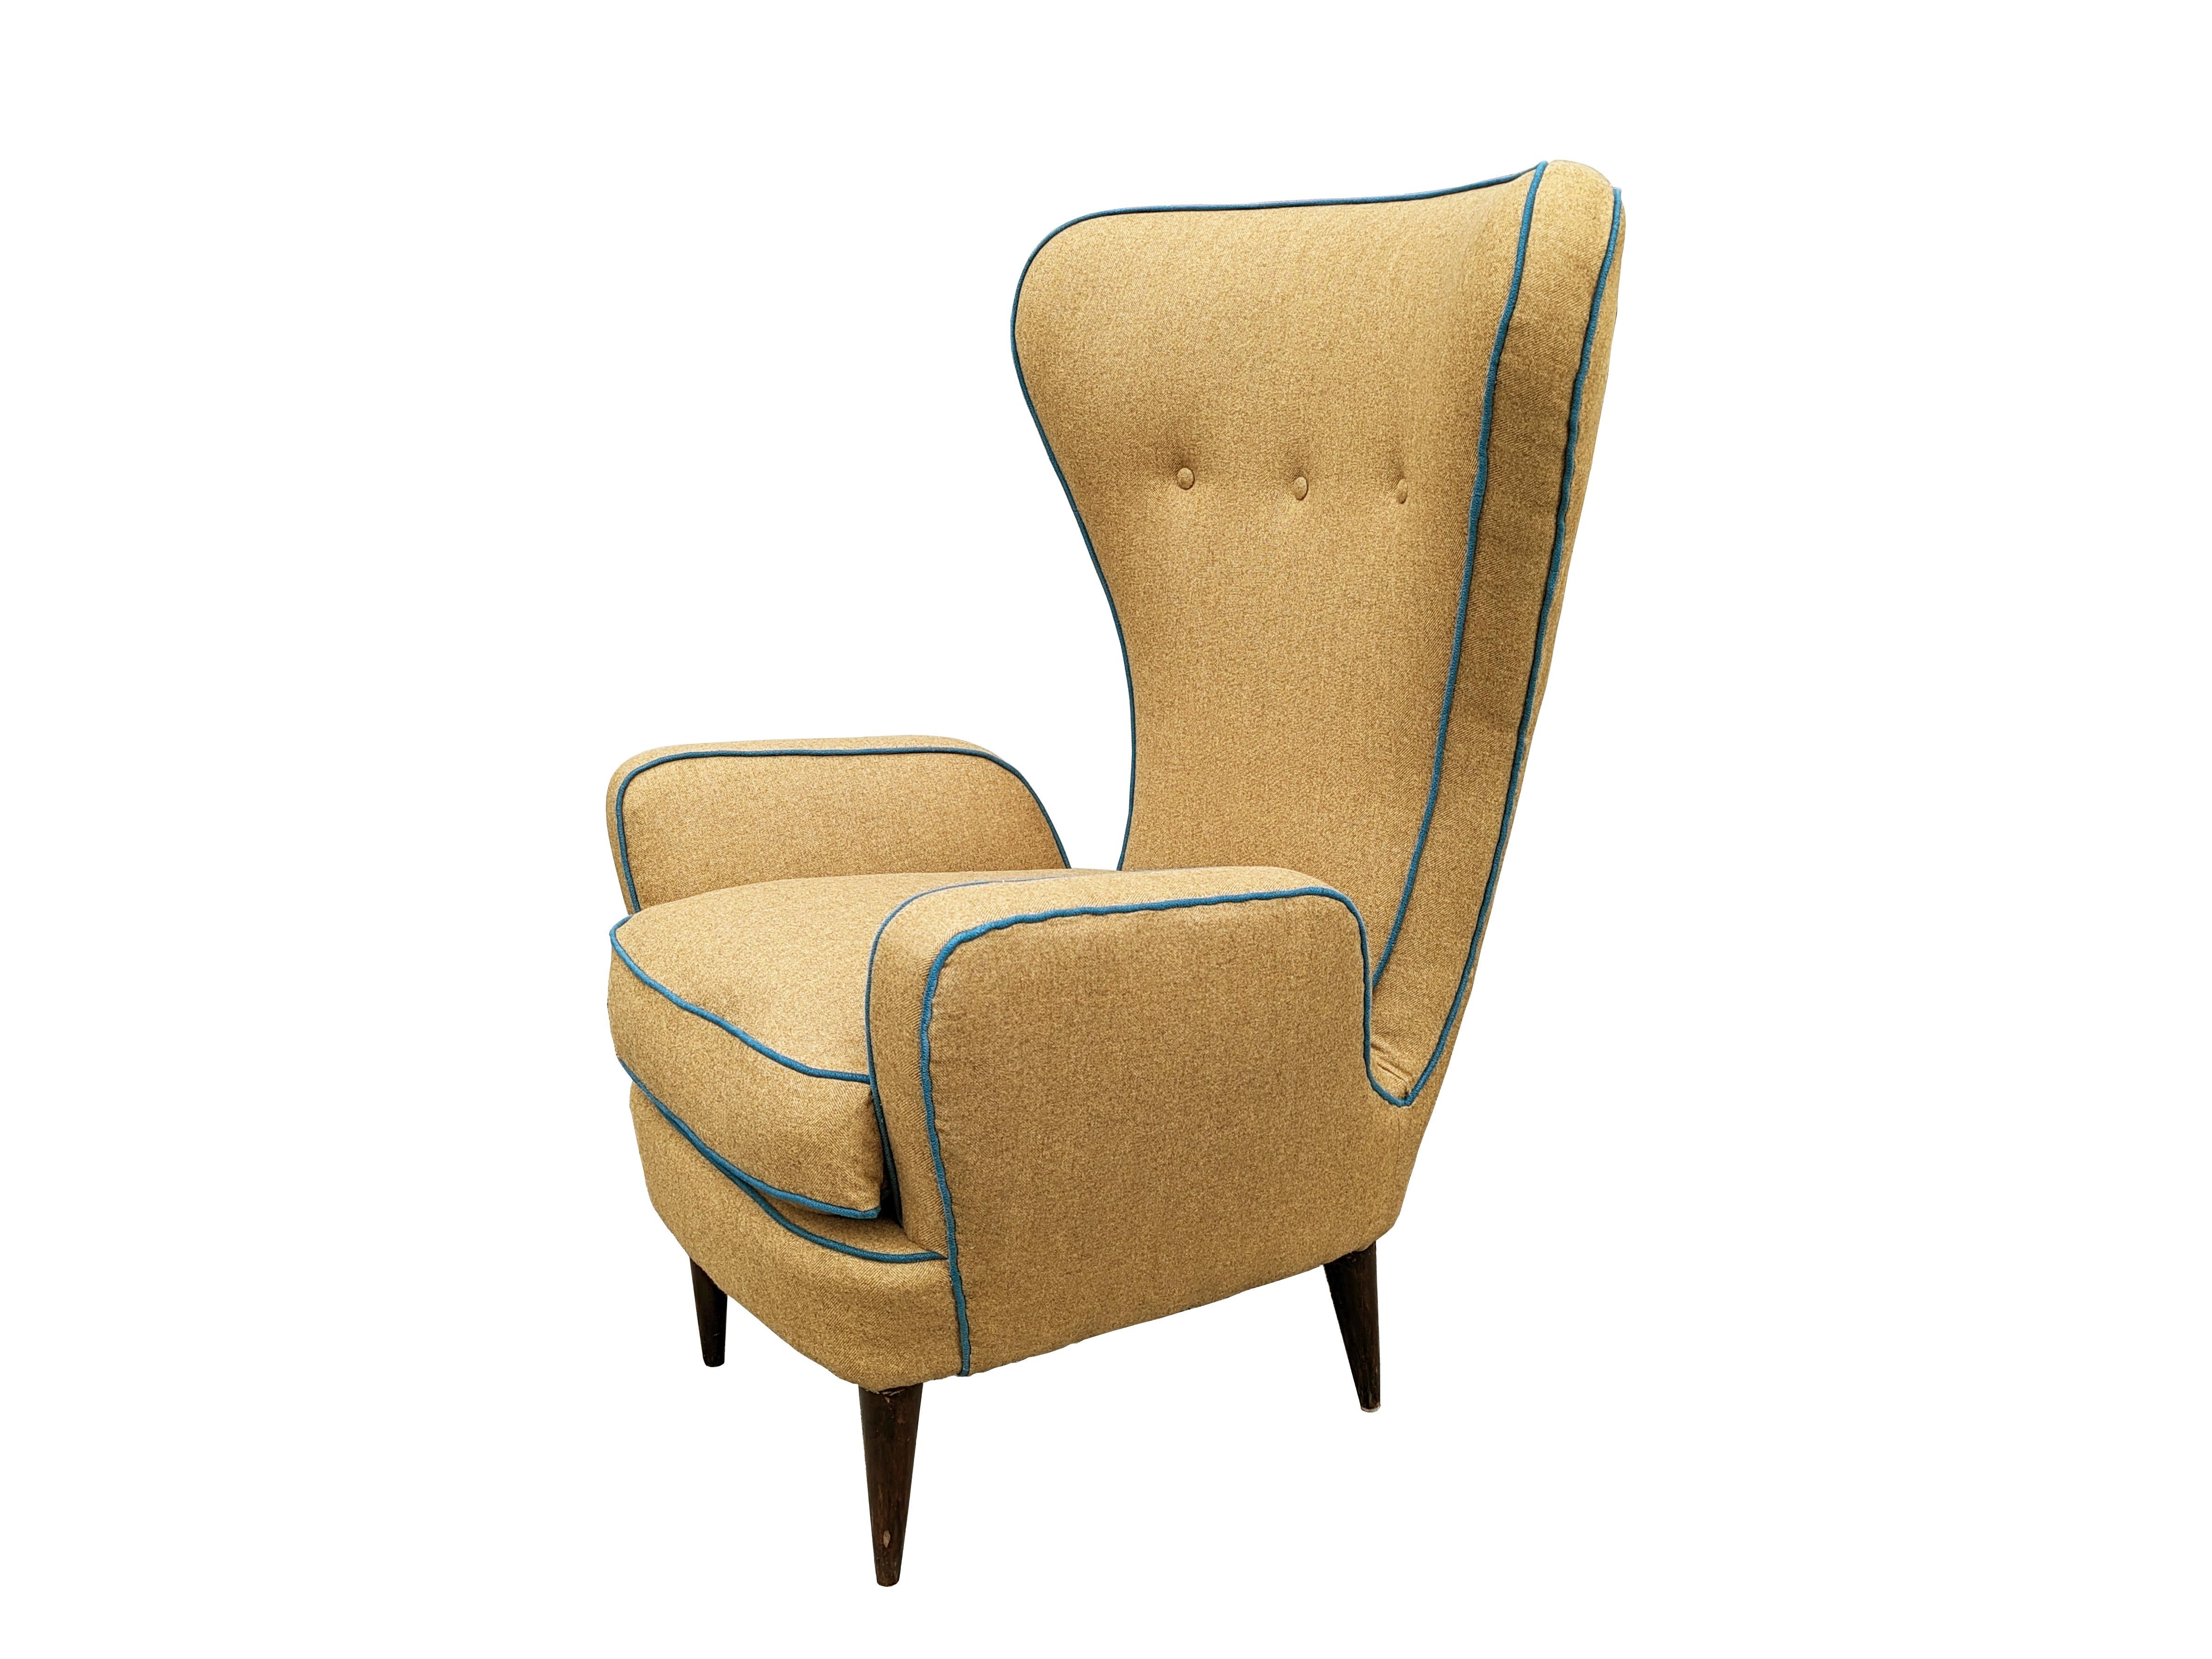 This sculptural highback armchair was designed by Emilio Sala and Giorgio Madini in the 1950s for the fratelli Galimberti furniture factory. The armchair has been completely reupholstered with an elegant camel and teal wool. The four feet have been